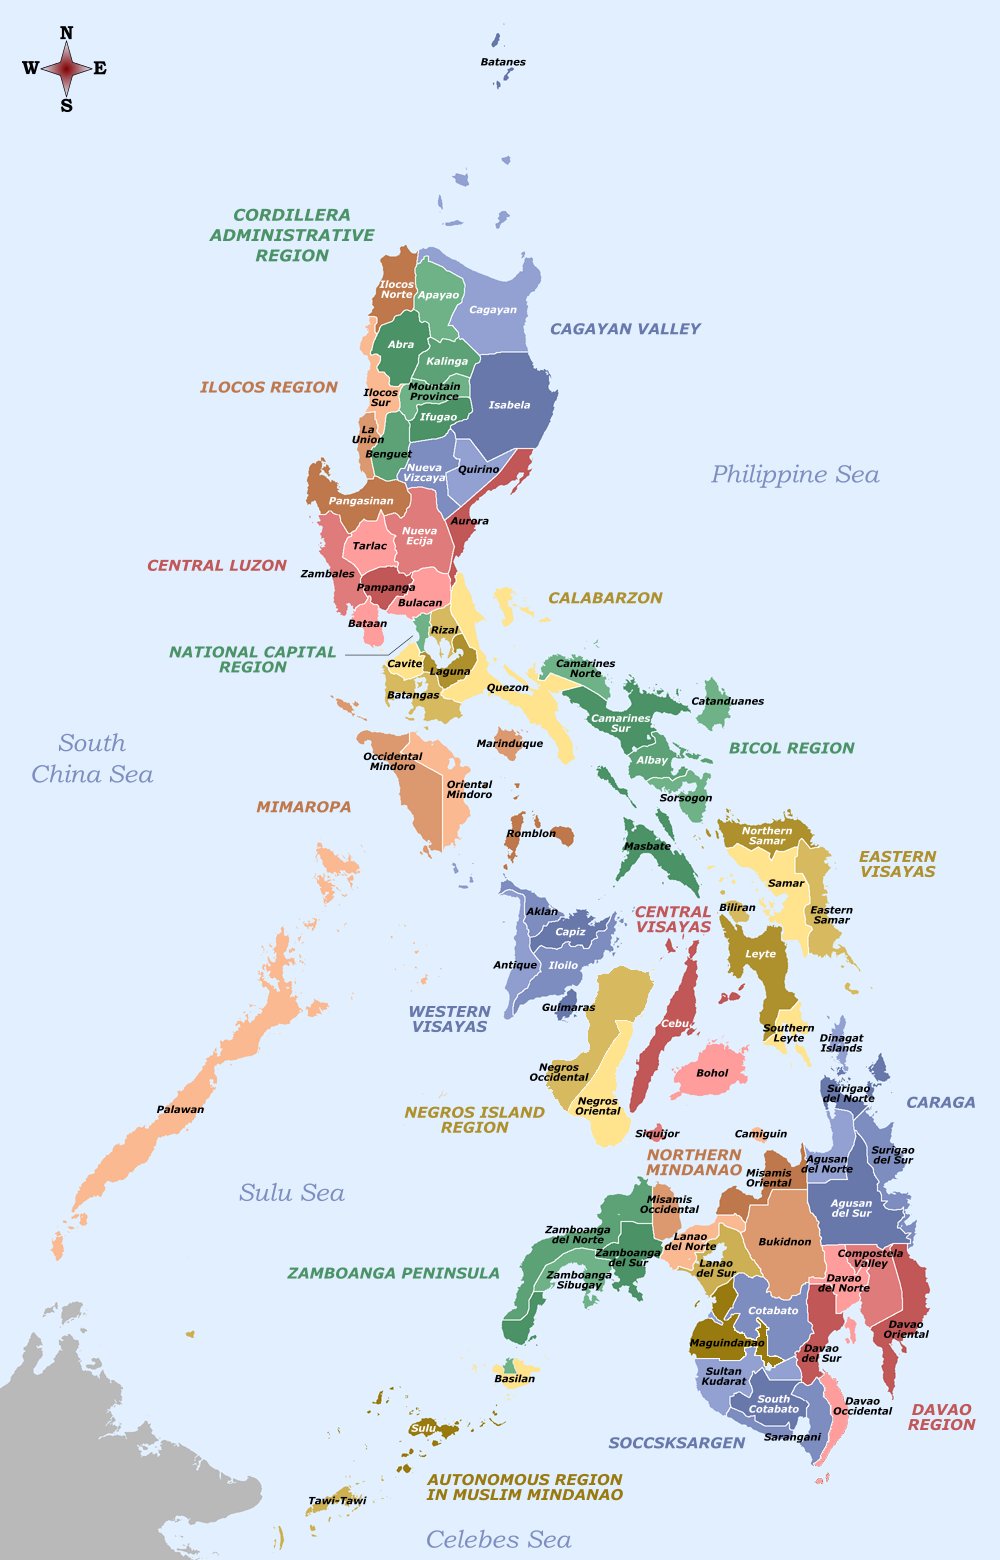 Labelled Map of the Philippines by Sanglahi86 <a href="https://commons.wikimedia.org/wiki/File:Labelled_map_of_the_Philippines_-_Provinces_and_Regions.png" target="_blank" rel="noopener">CC BY-SA 4.0 </a>